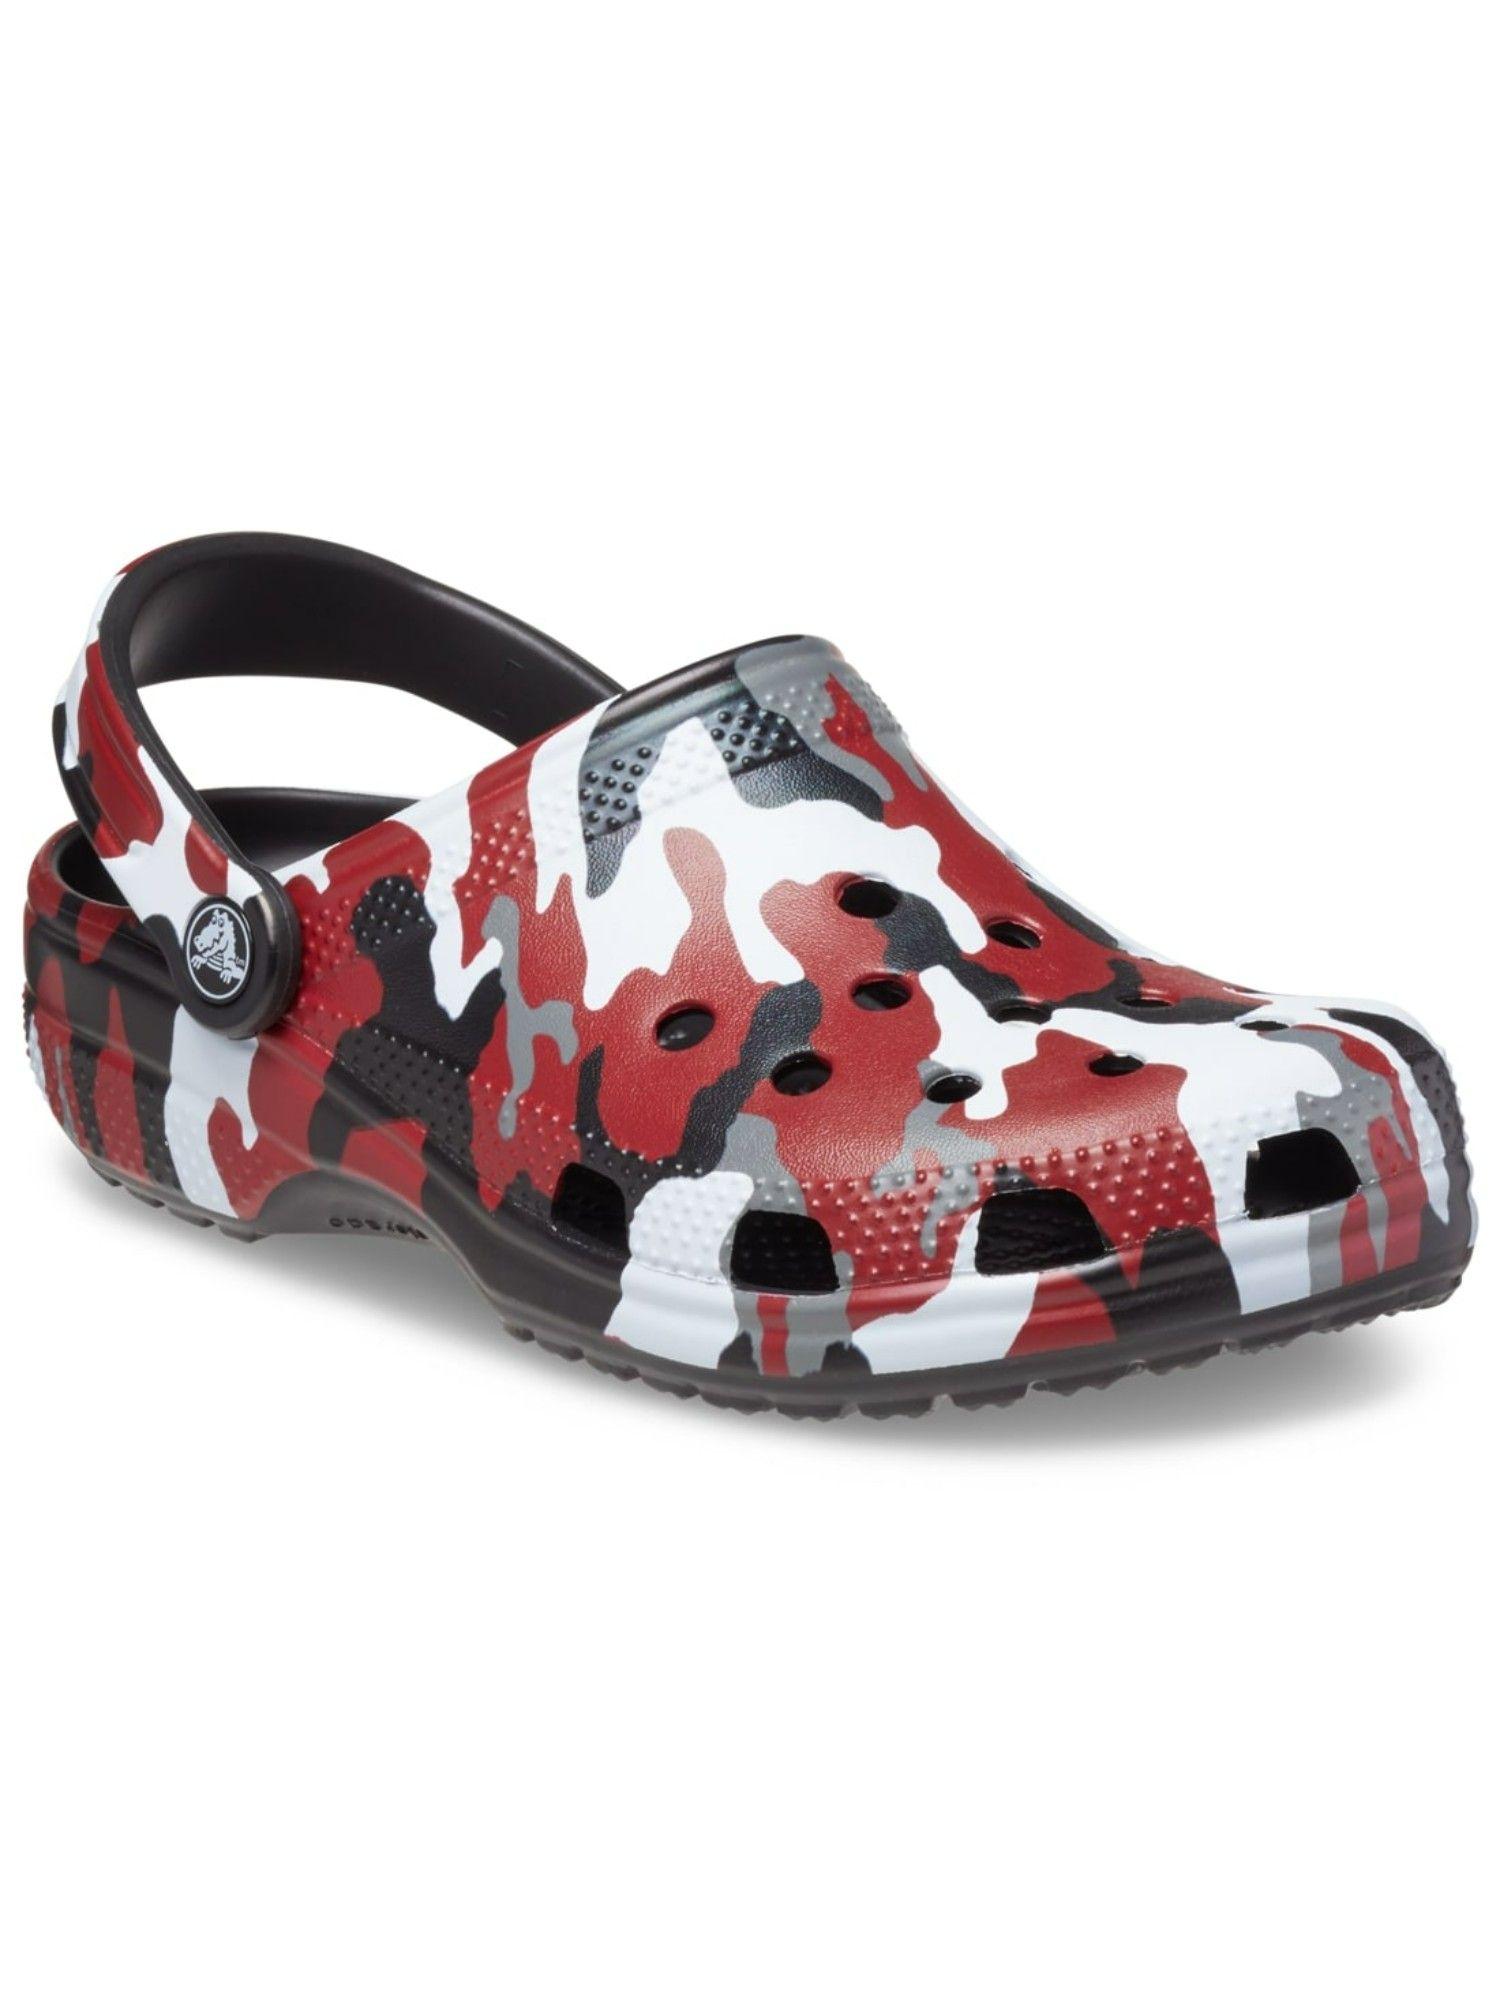 classic multi color unisex adults camouflage clog